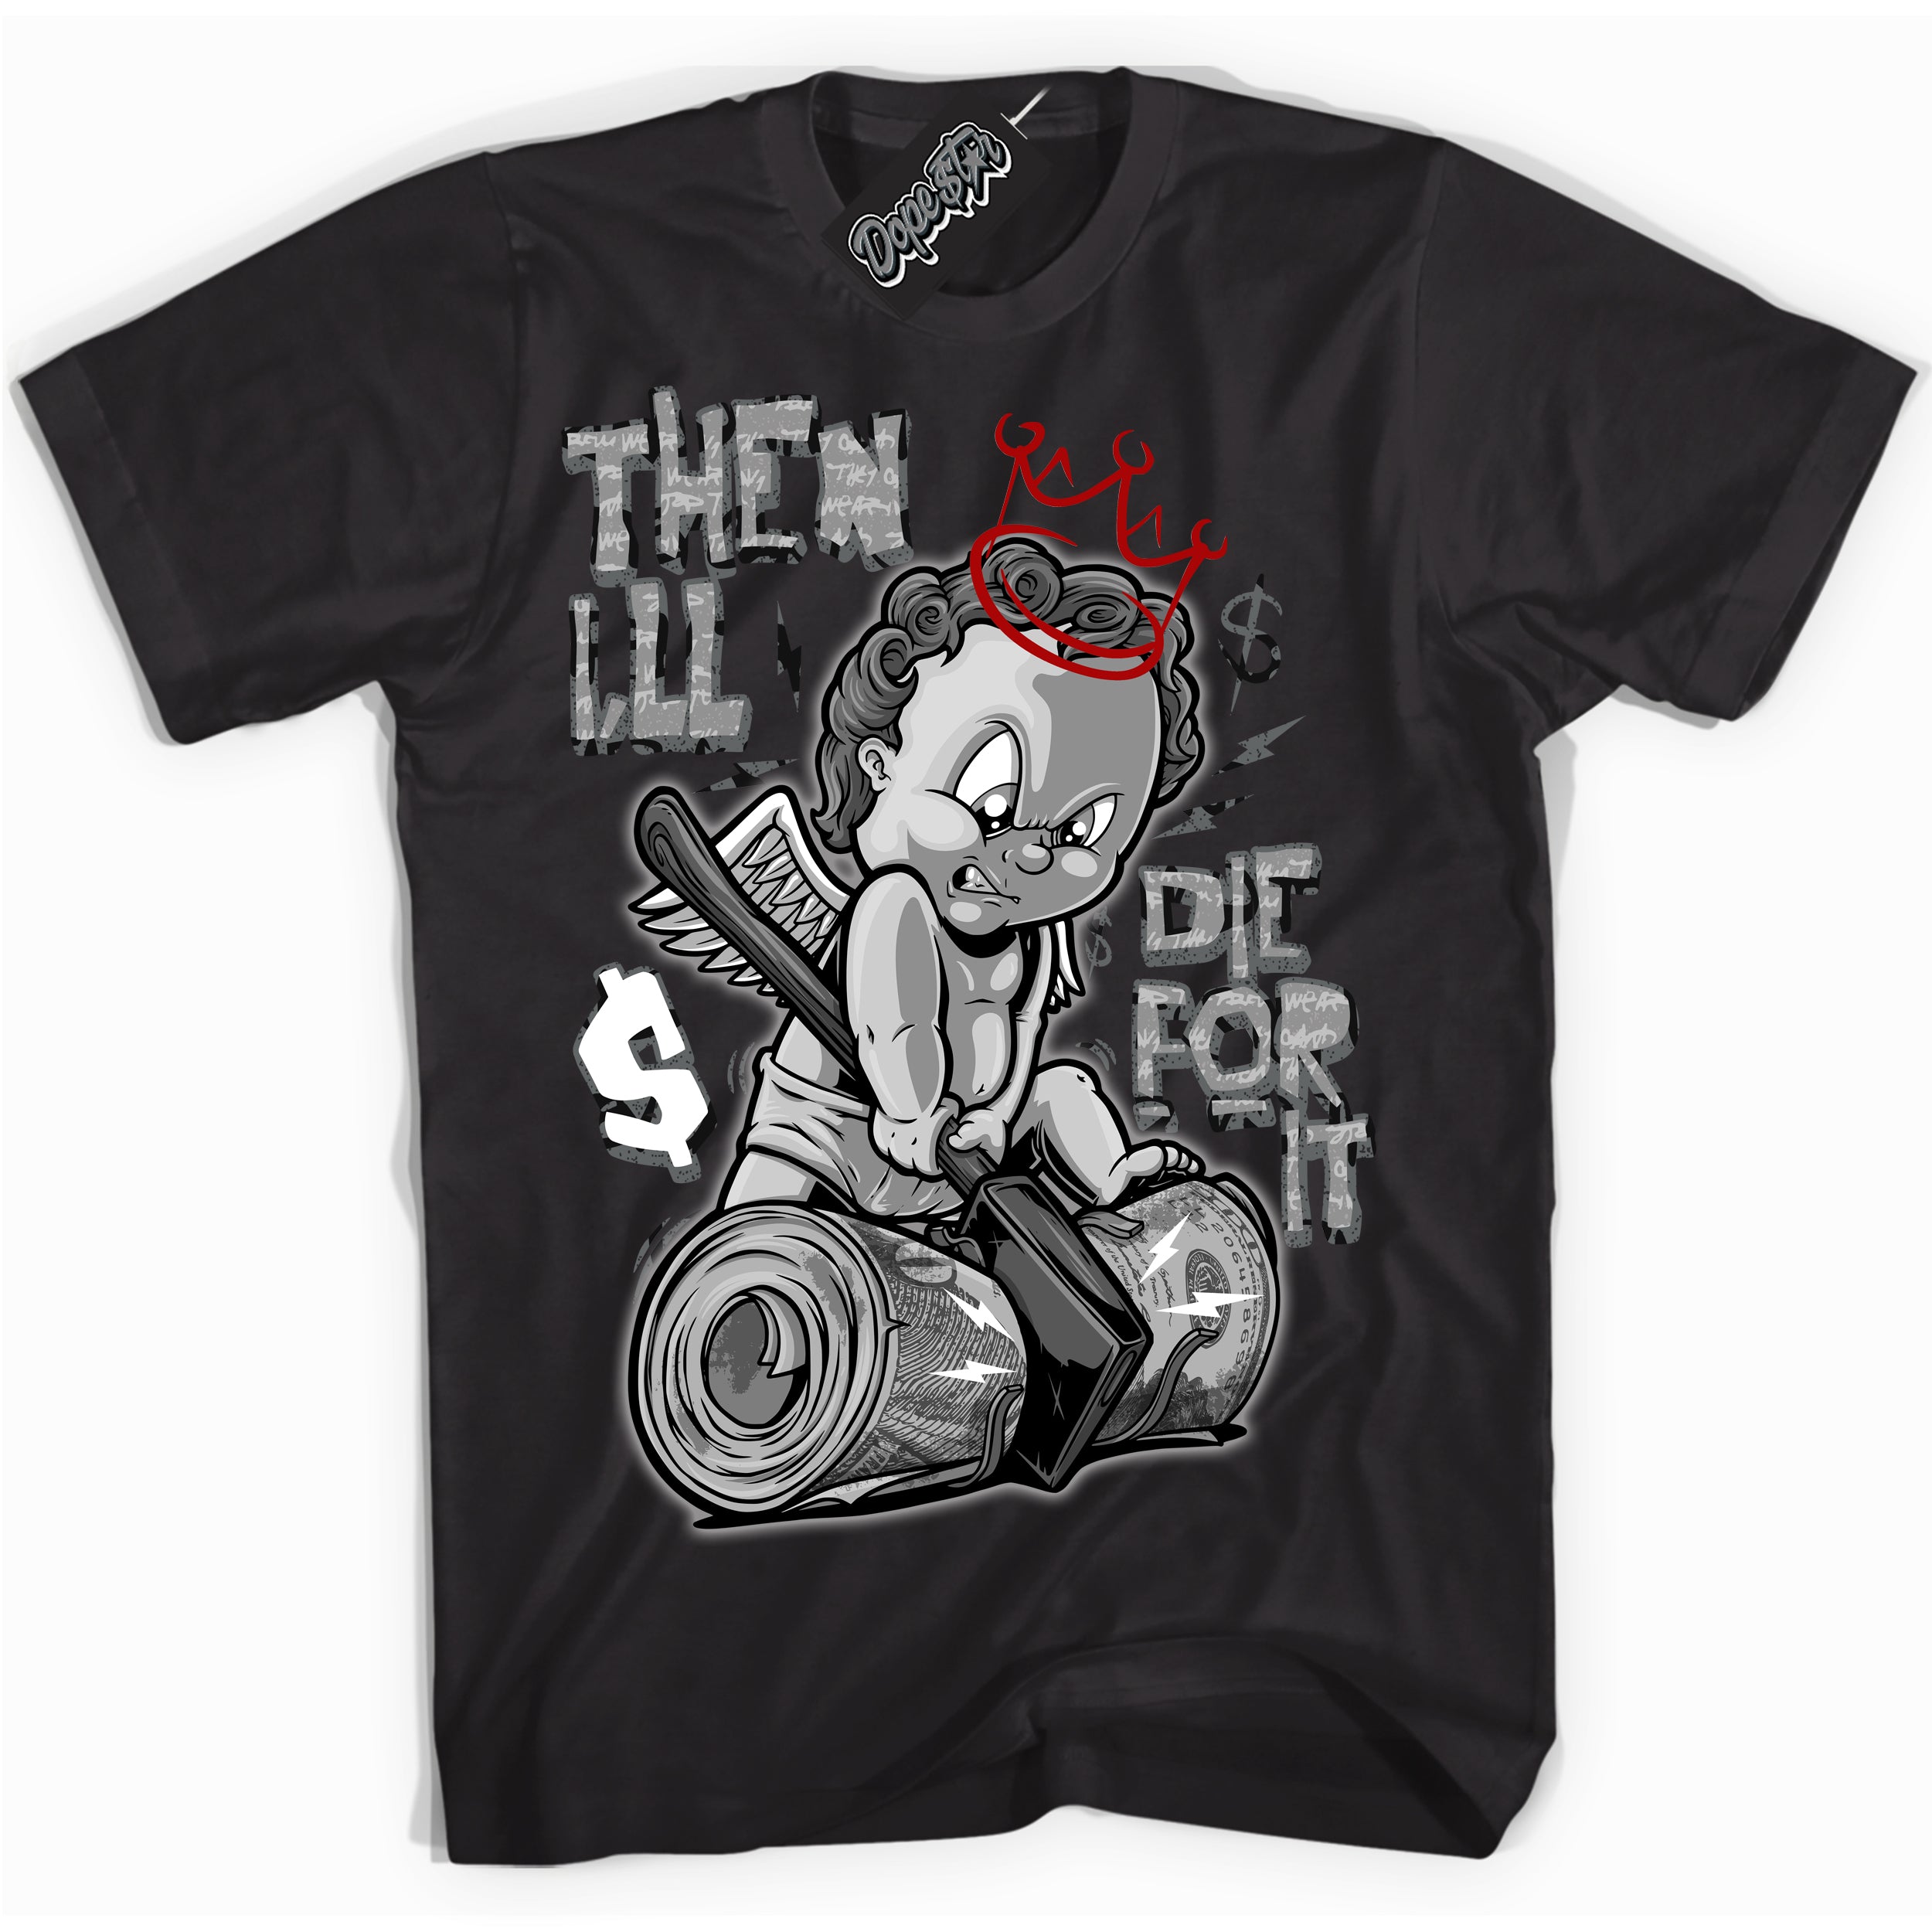 Cool Black Shirt with “ Then I'll ” design that perfectly matches Rebellionaire 1s Sneakers.